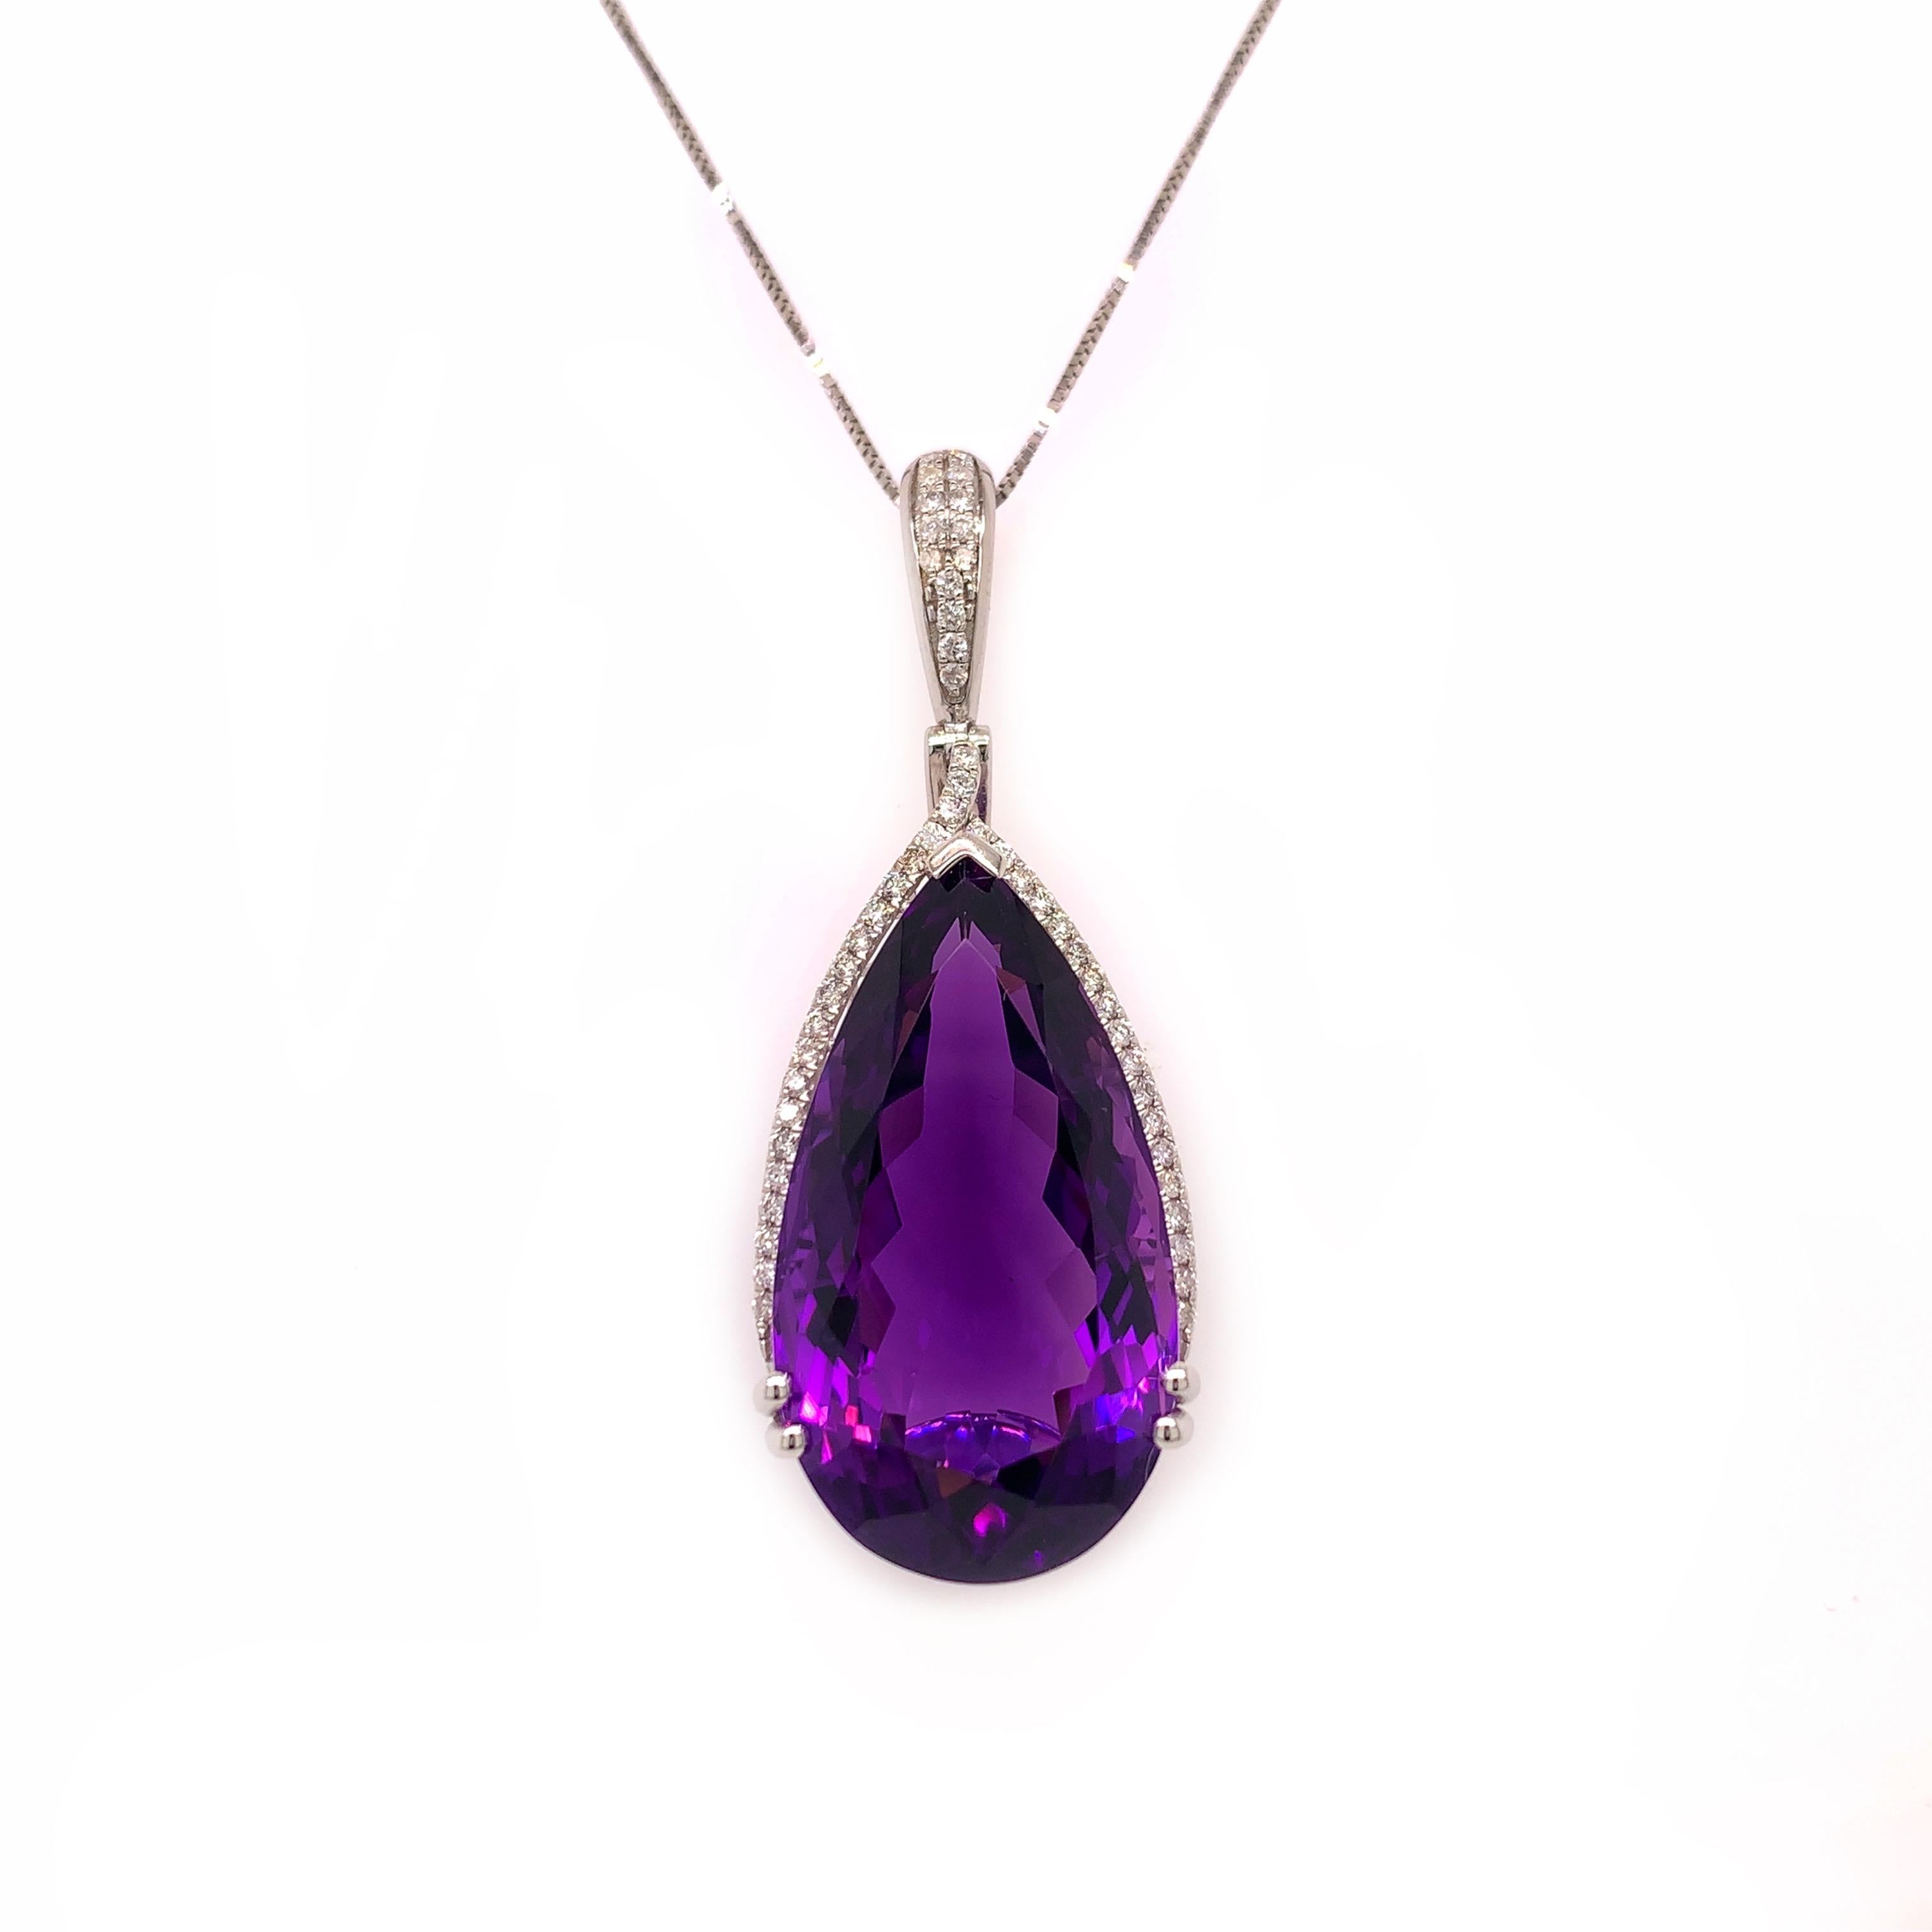 Glamorous large amethyst pendant. High brilliance, transparent clean, pear shape faceted, with a checkered cut pattern, rich eggplant purple tone, natural 26.82 carats amethyst mounted in an open basket profile with four bead prongs and knife prong,